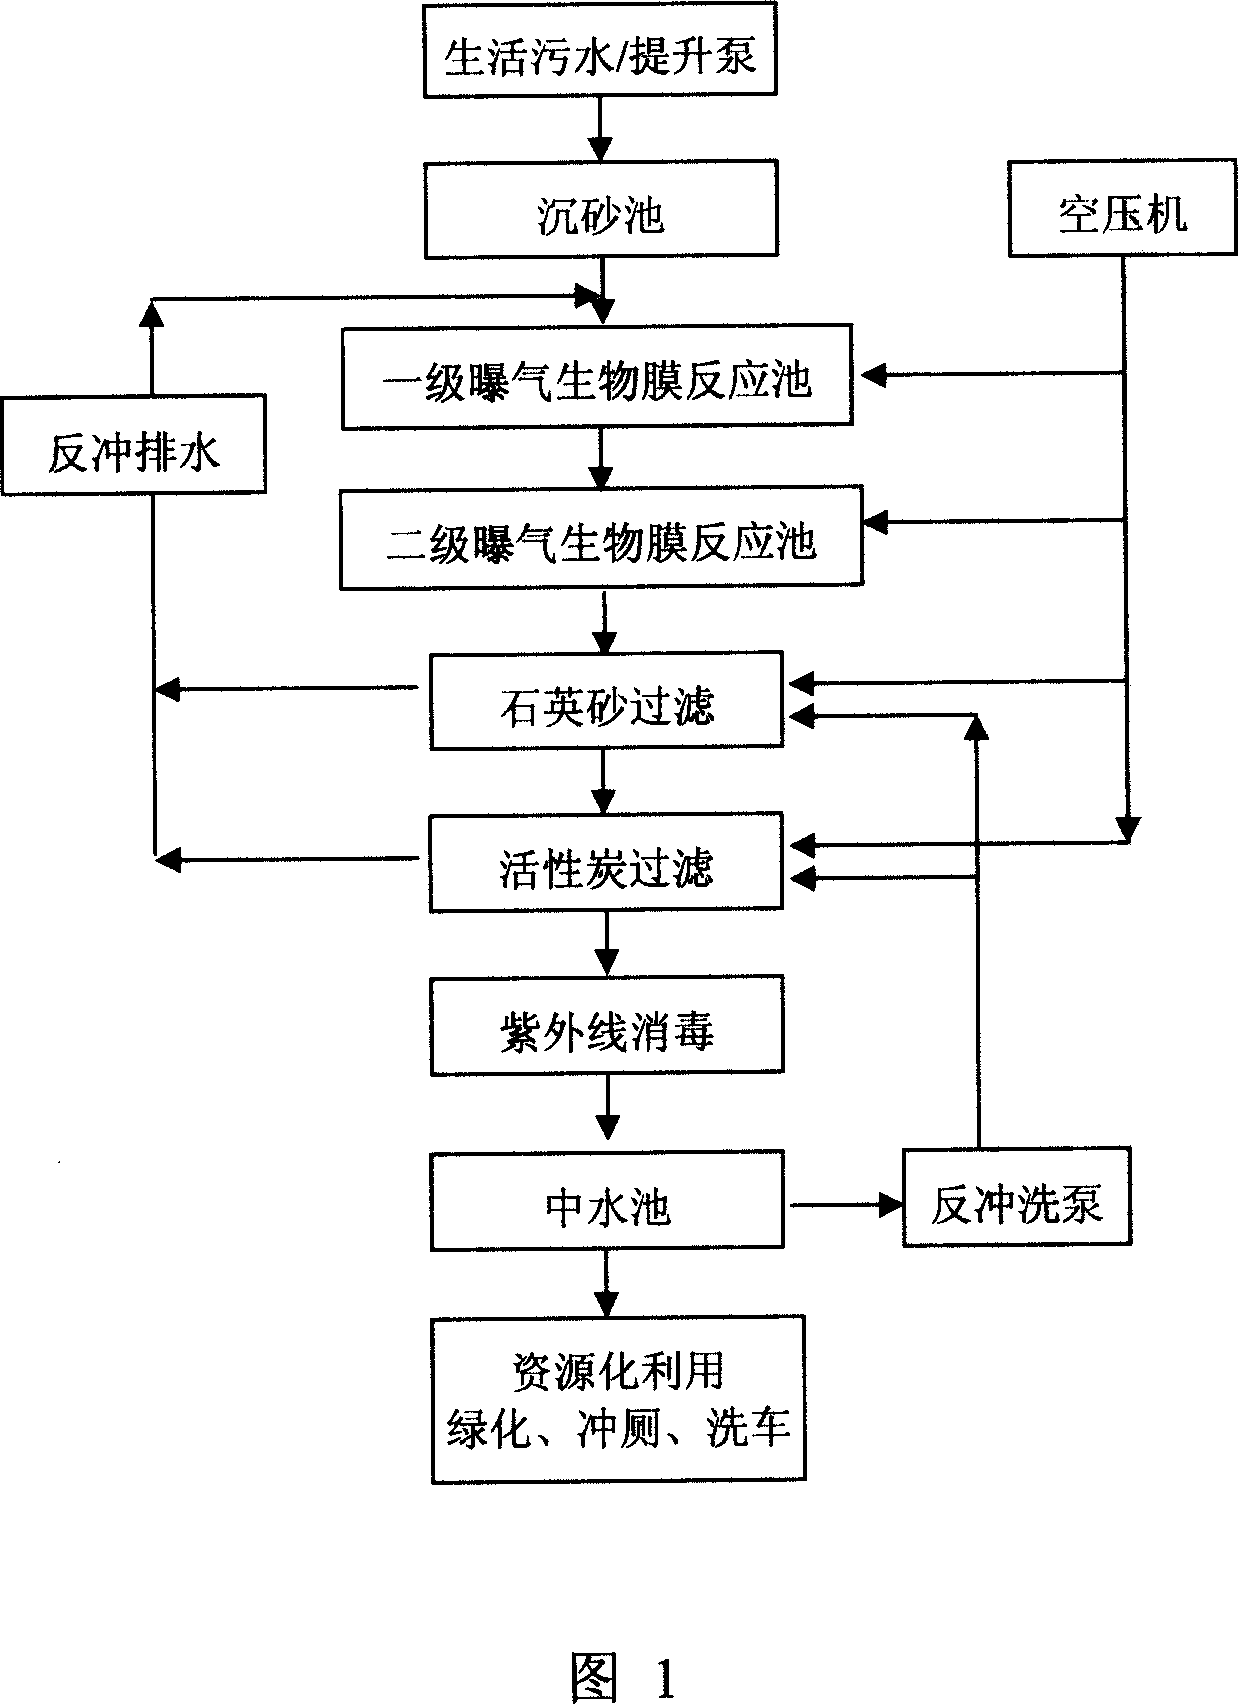 Domestic sewage resource treatment process and device with zero discharge of biological sludge